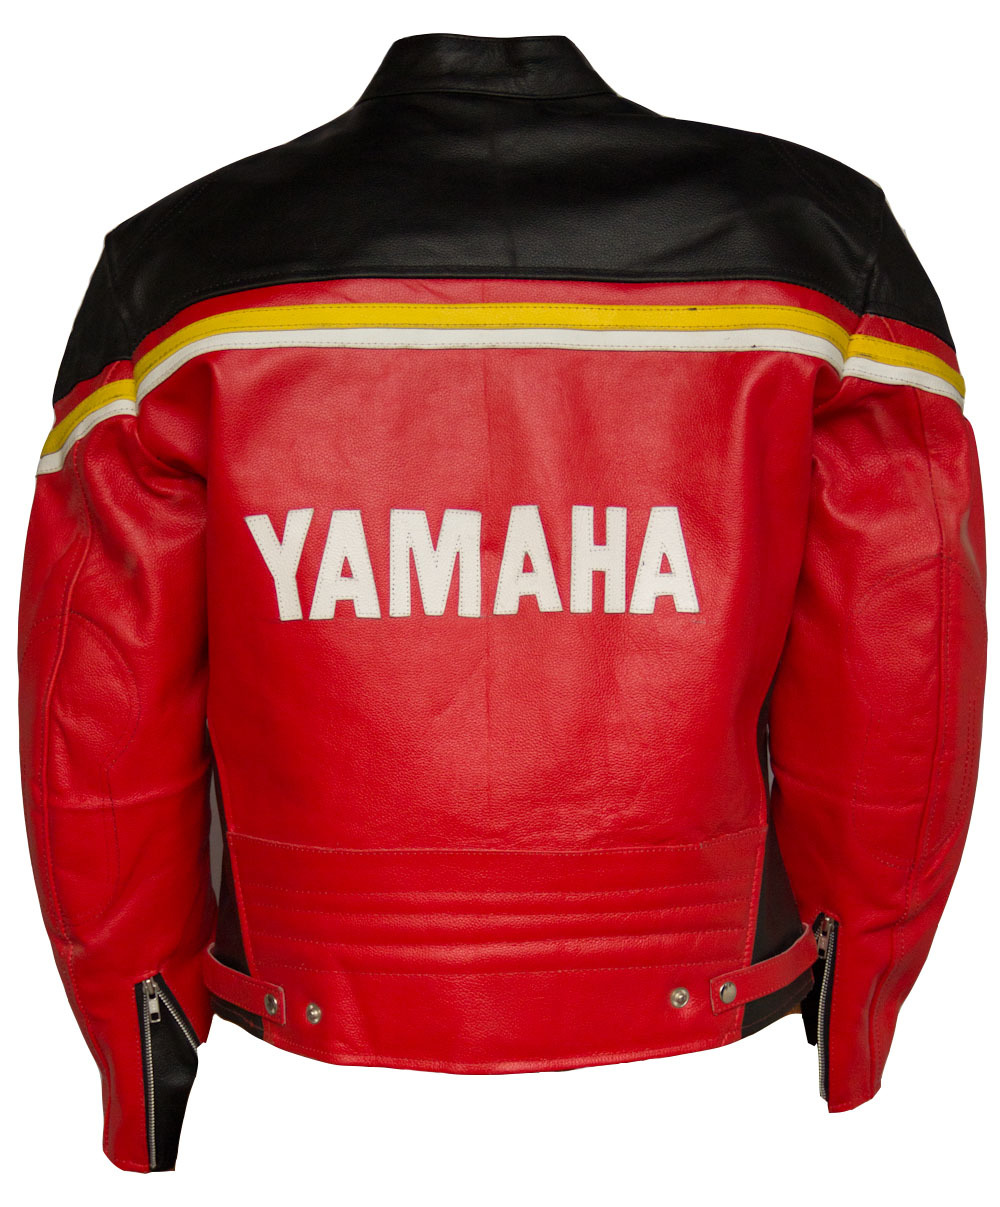 MEN YAMAHA RACING MOTORCYCLE JACKET LEATHER RED BALCK COLOR SAFETY PROTECTION - Outerwear